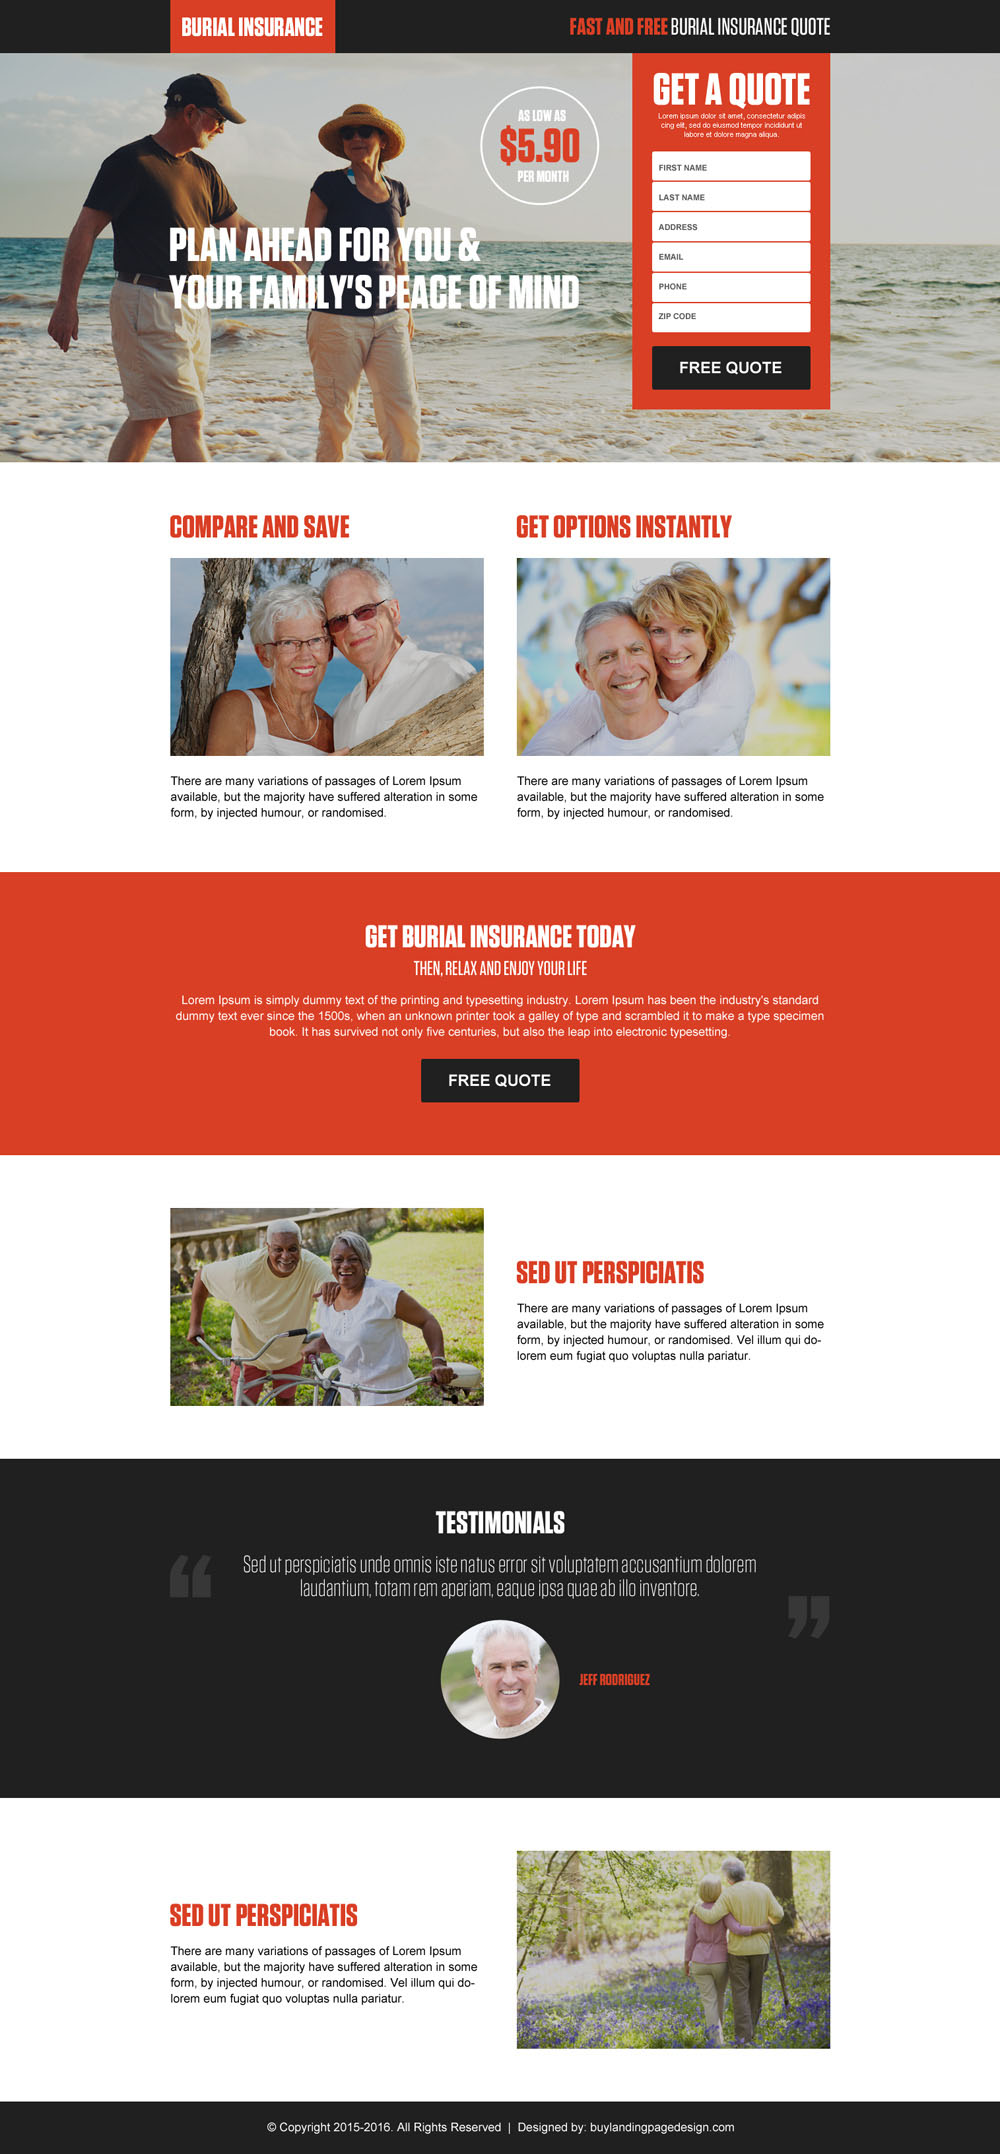 get-free-burial-insurance-quote-service-landing-page-design-001